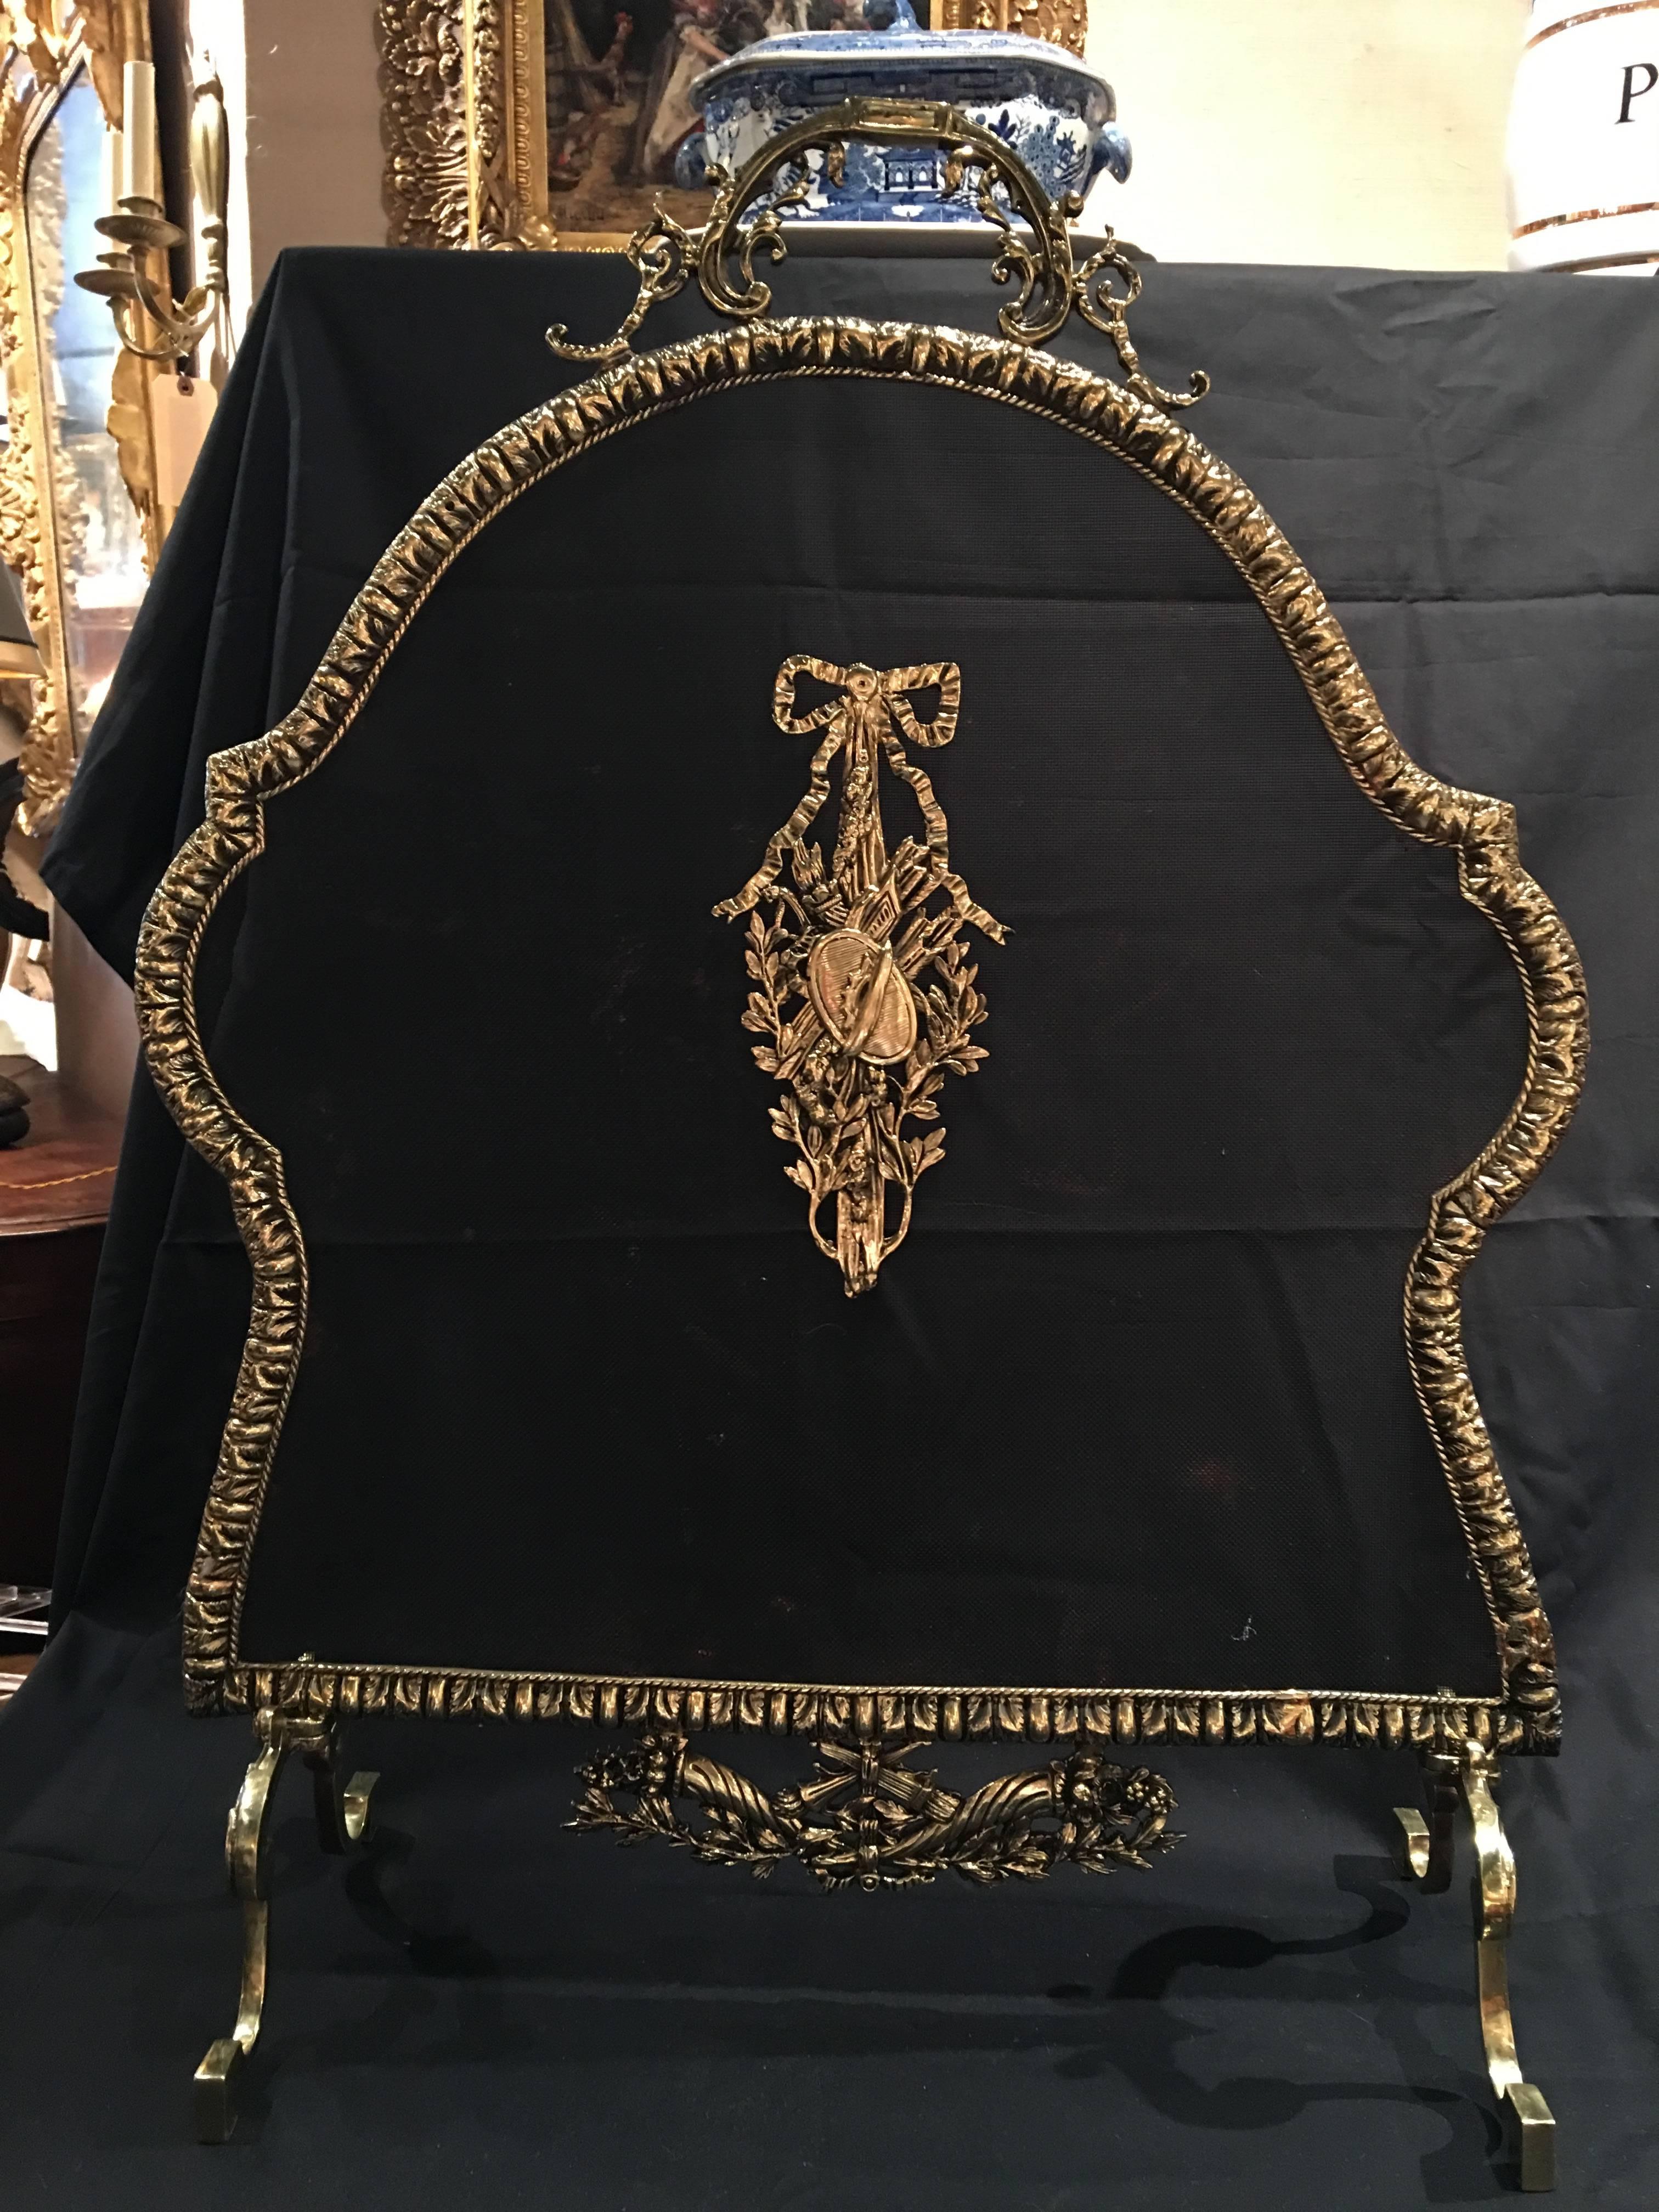 French polished brass fireplace screen with decorative bow, 19th century.